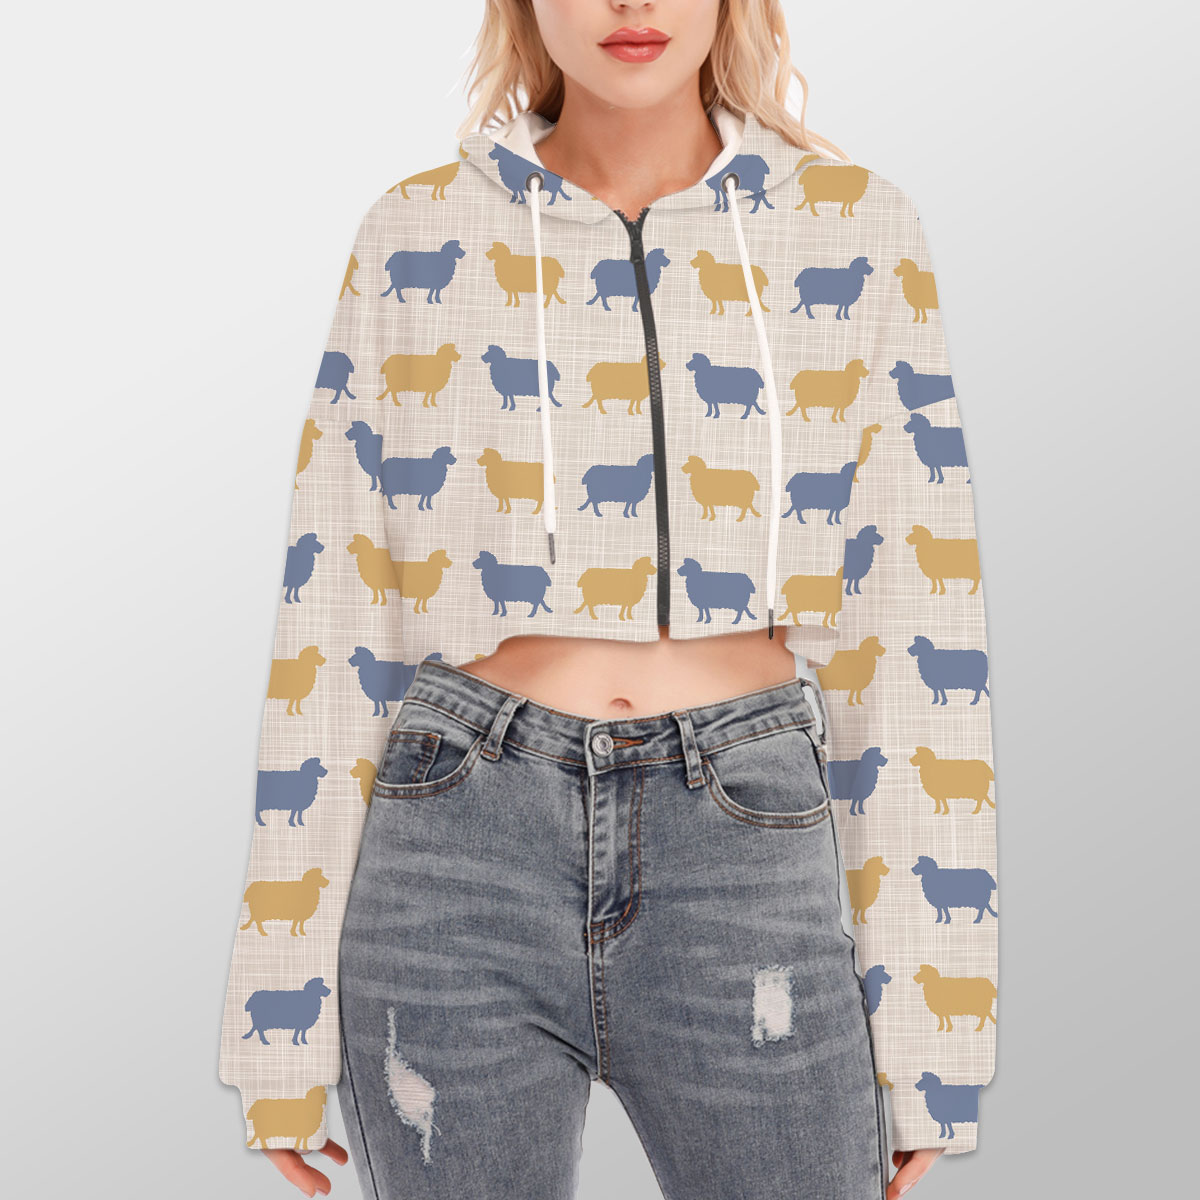 Sheep Silhouette Pattern Hoodie With Zipper Closure